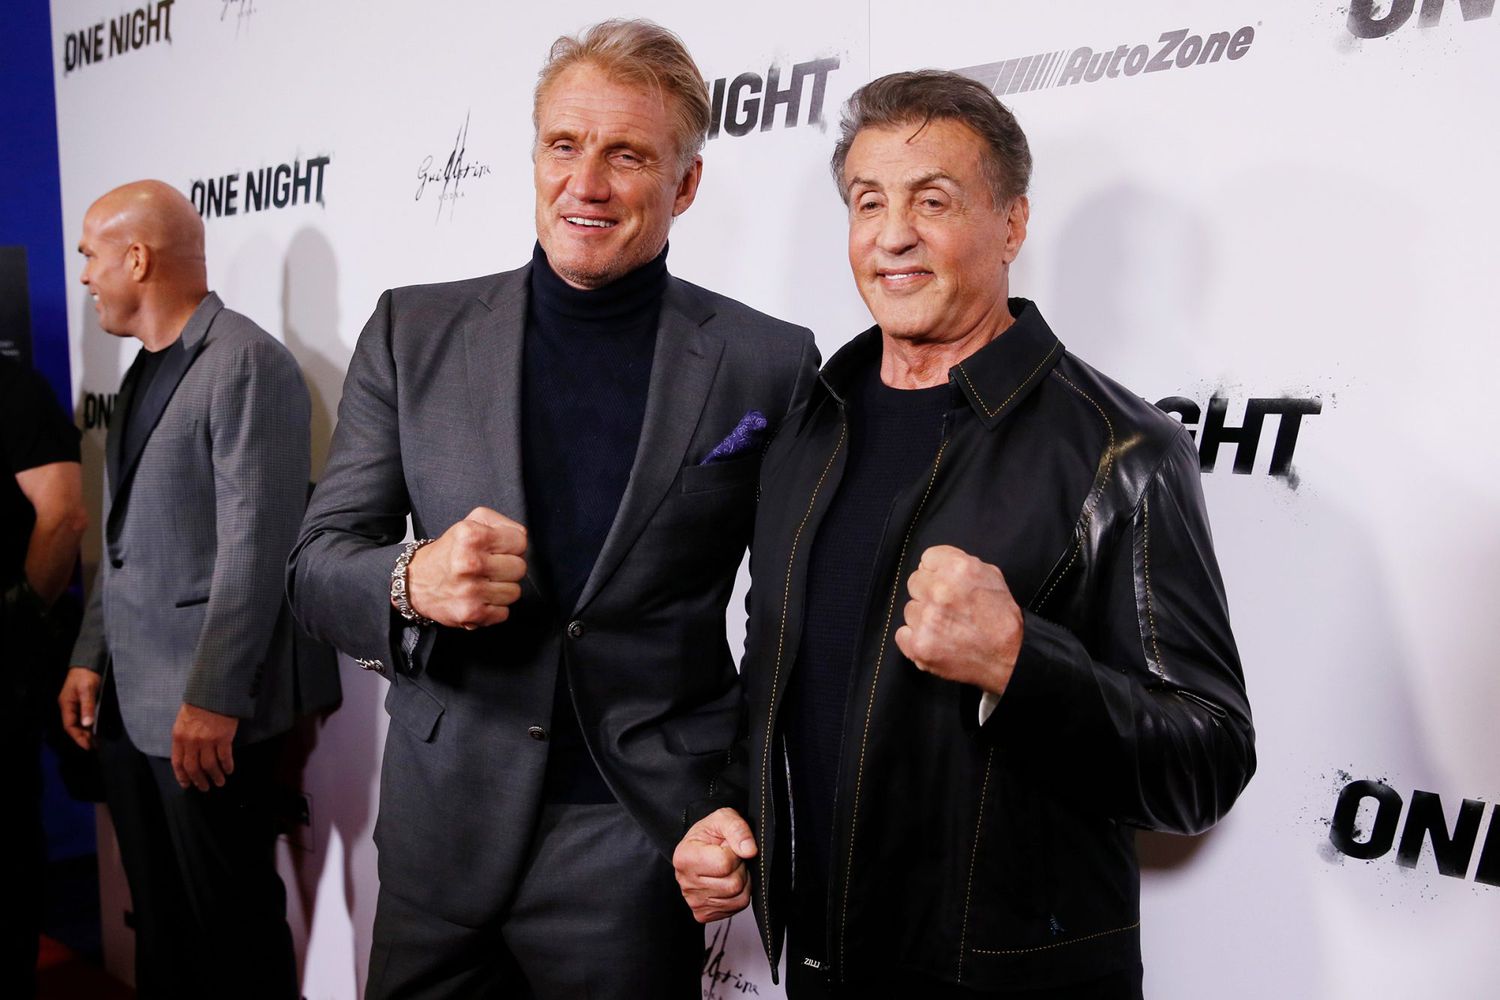 Dolph Lundgren, Sylvester Stallone. Rocky" co-star Dolph Lundgren, left, poses with Executive Producer Sylvester Stallone, right, on the red carpet at the premiere of DAZN's "ONE NIGHT: JOSHUA VS. RUIZ," a documentary film from Balboa Productions and DAZN Originals at the Writers Guild Theater, in Beverly Hills, Calif DAZN's "ONE NIGHT: JOSHUA VS. RUIZ" Premiere, Beverly Hills, USA - 21 Nov 2019